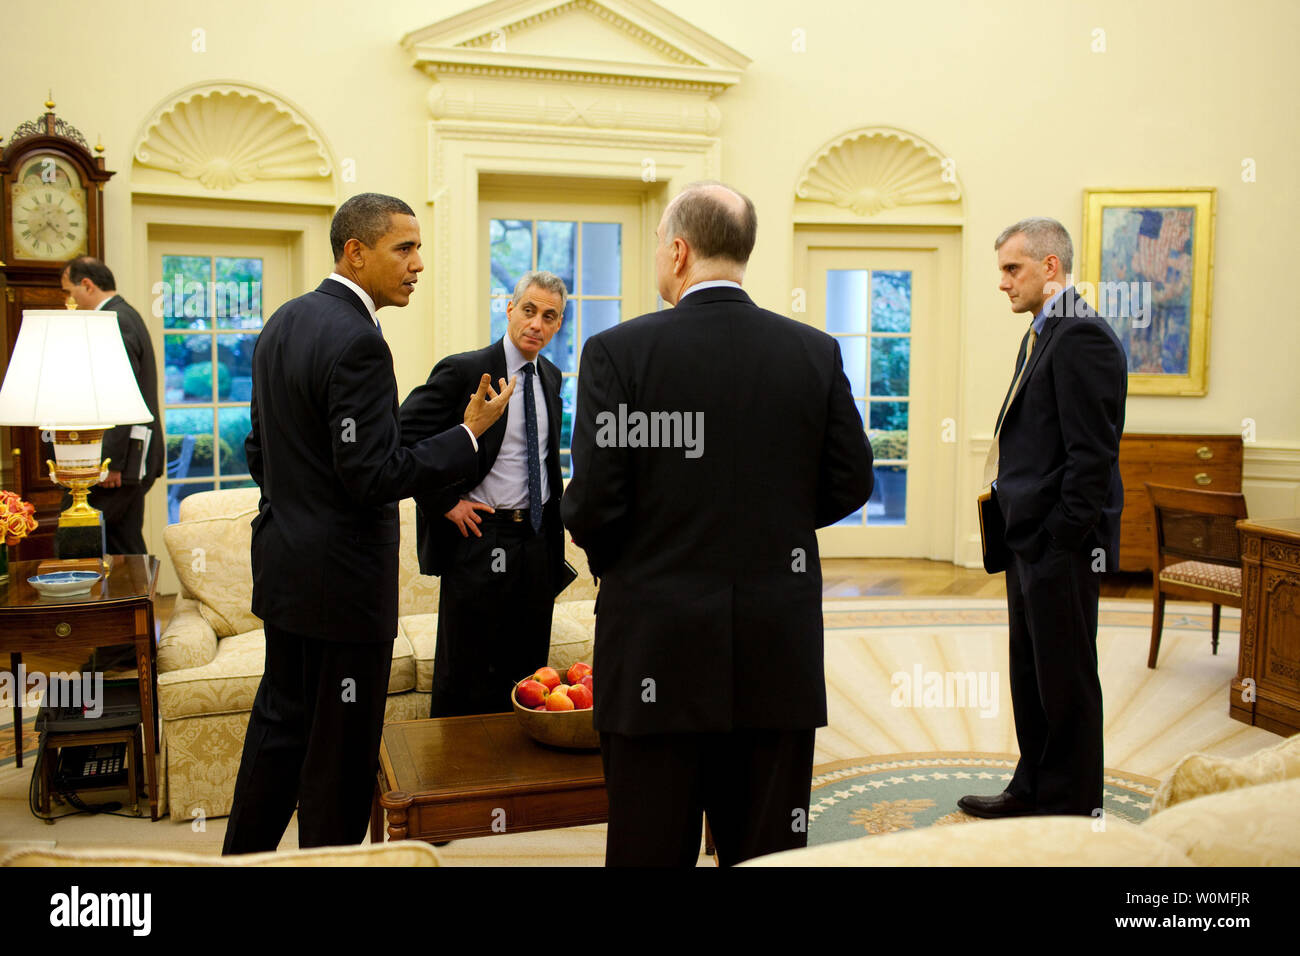 President Barack Obama talks with Chief of Staff Rahm Emanuel, Deputy National Security Advisor Tom Donilon and  NSC Chief of Staff Denis McDonough in the Oval Office, October 28, 2009.   UPI/Pete Souza/White House Stock Photo